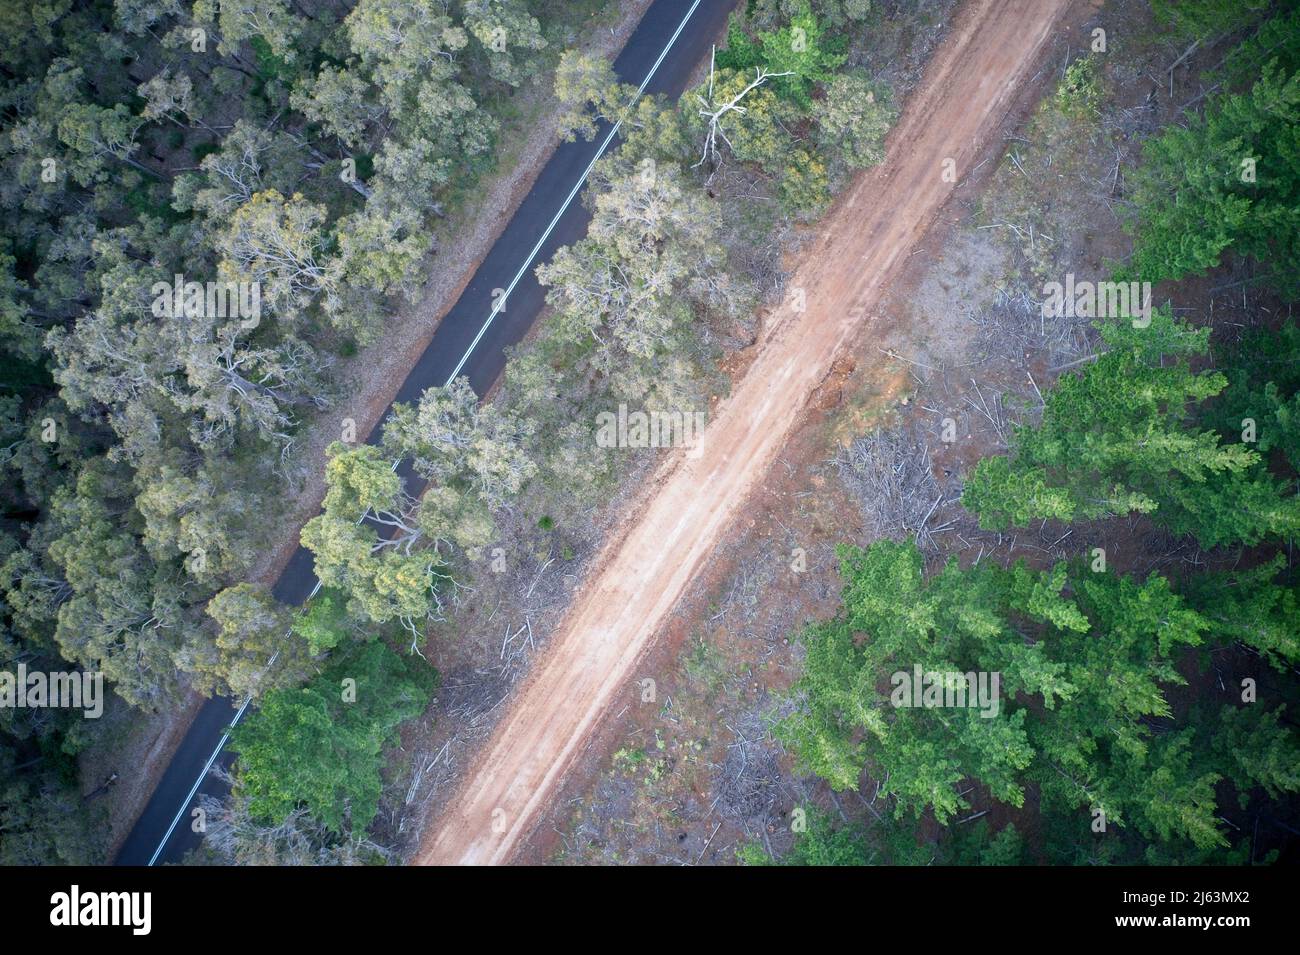 Drone field of view of pine forest and roads forming patterns in nature in Western Australia. Stock Photo